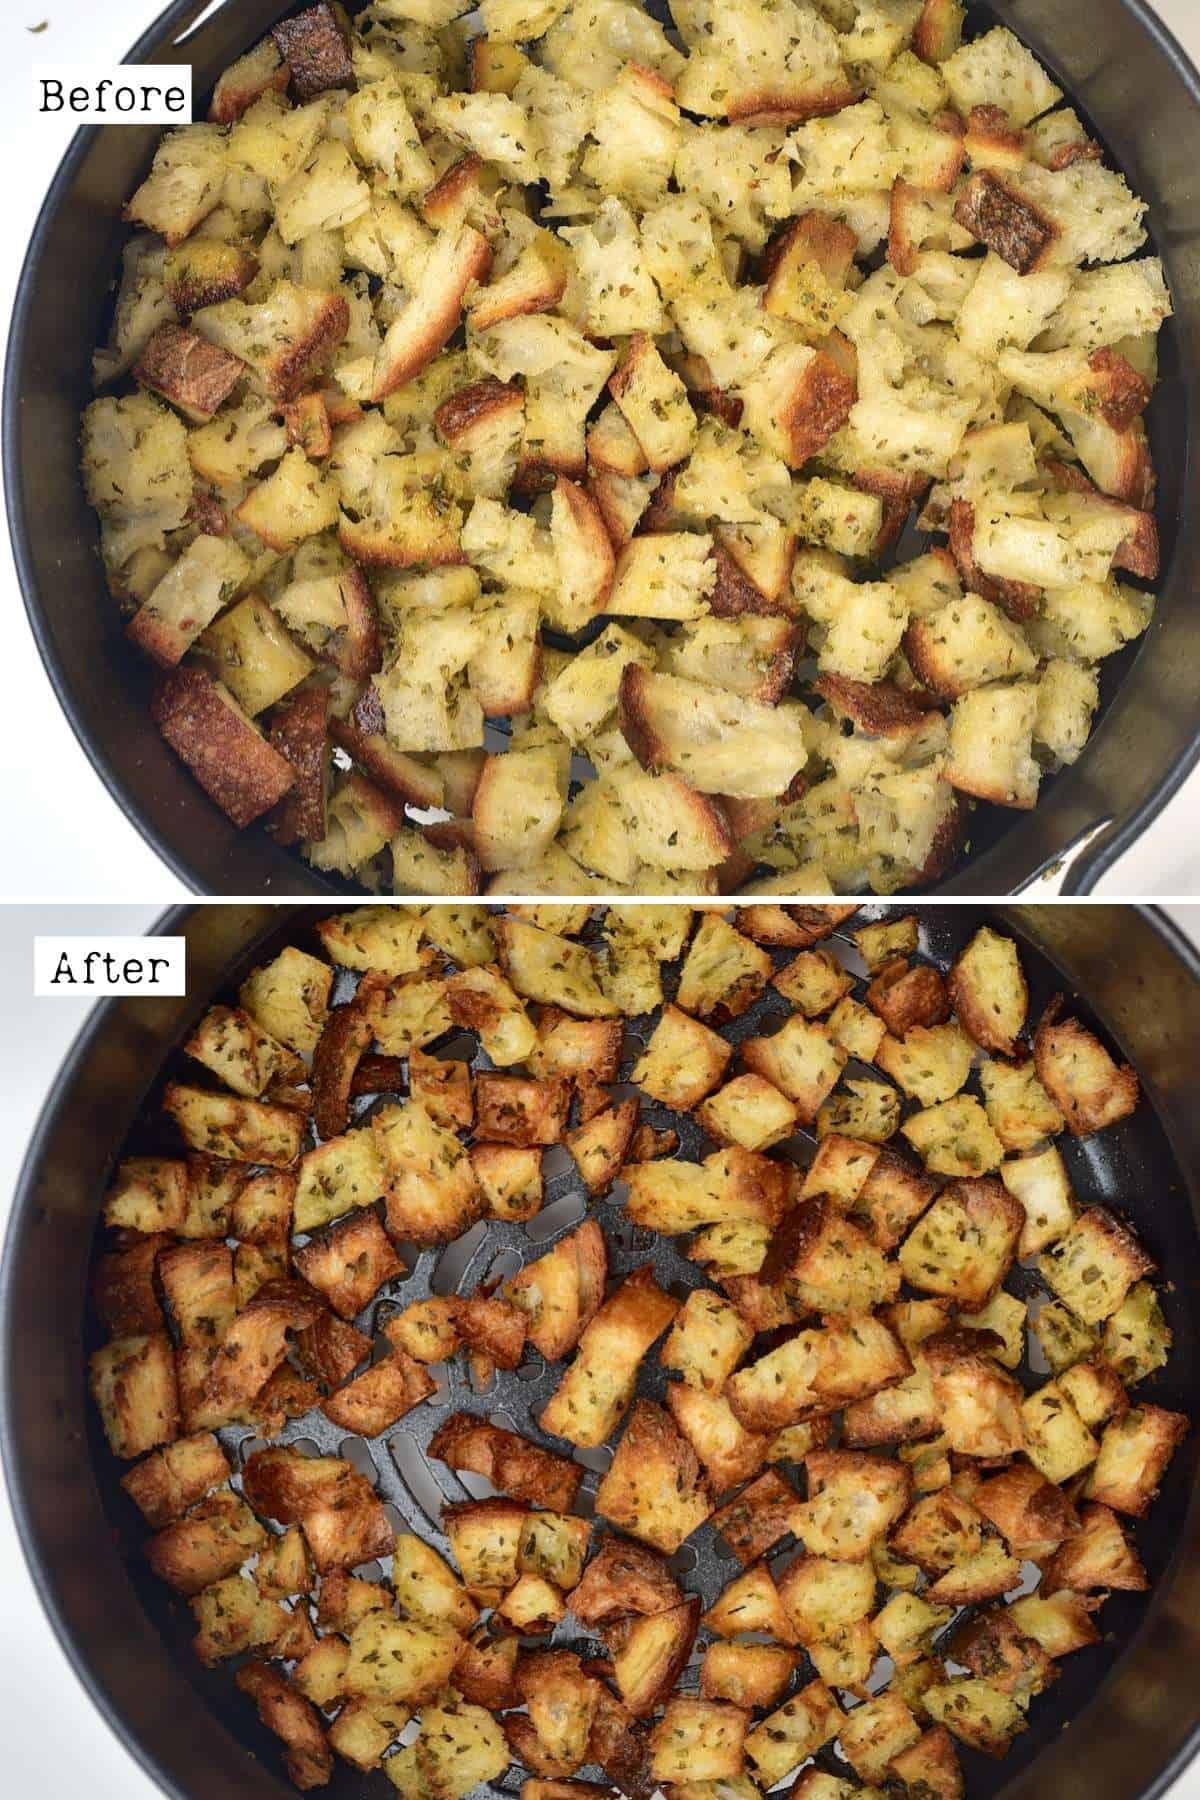 Before and after air frying croutons